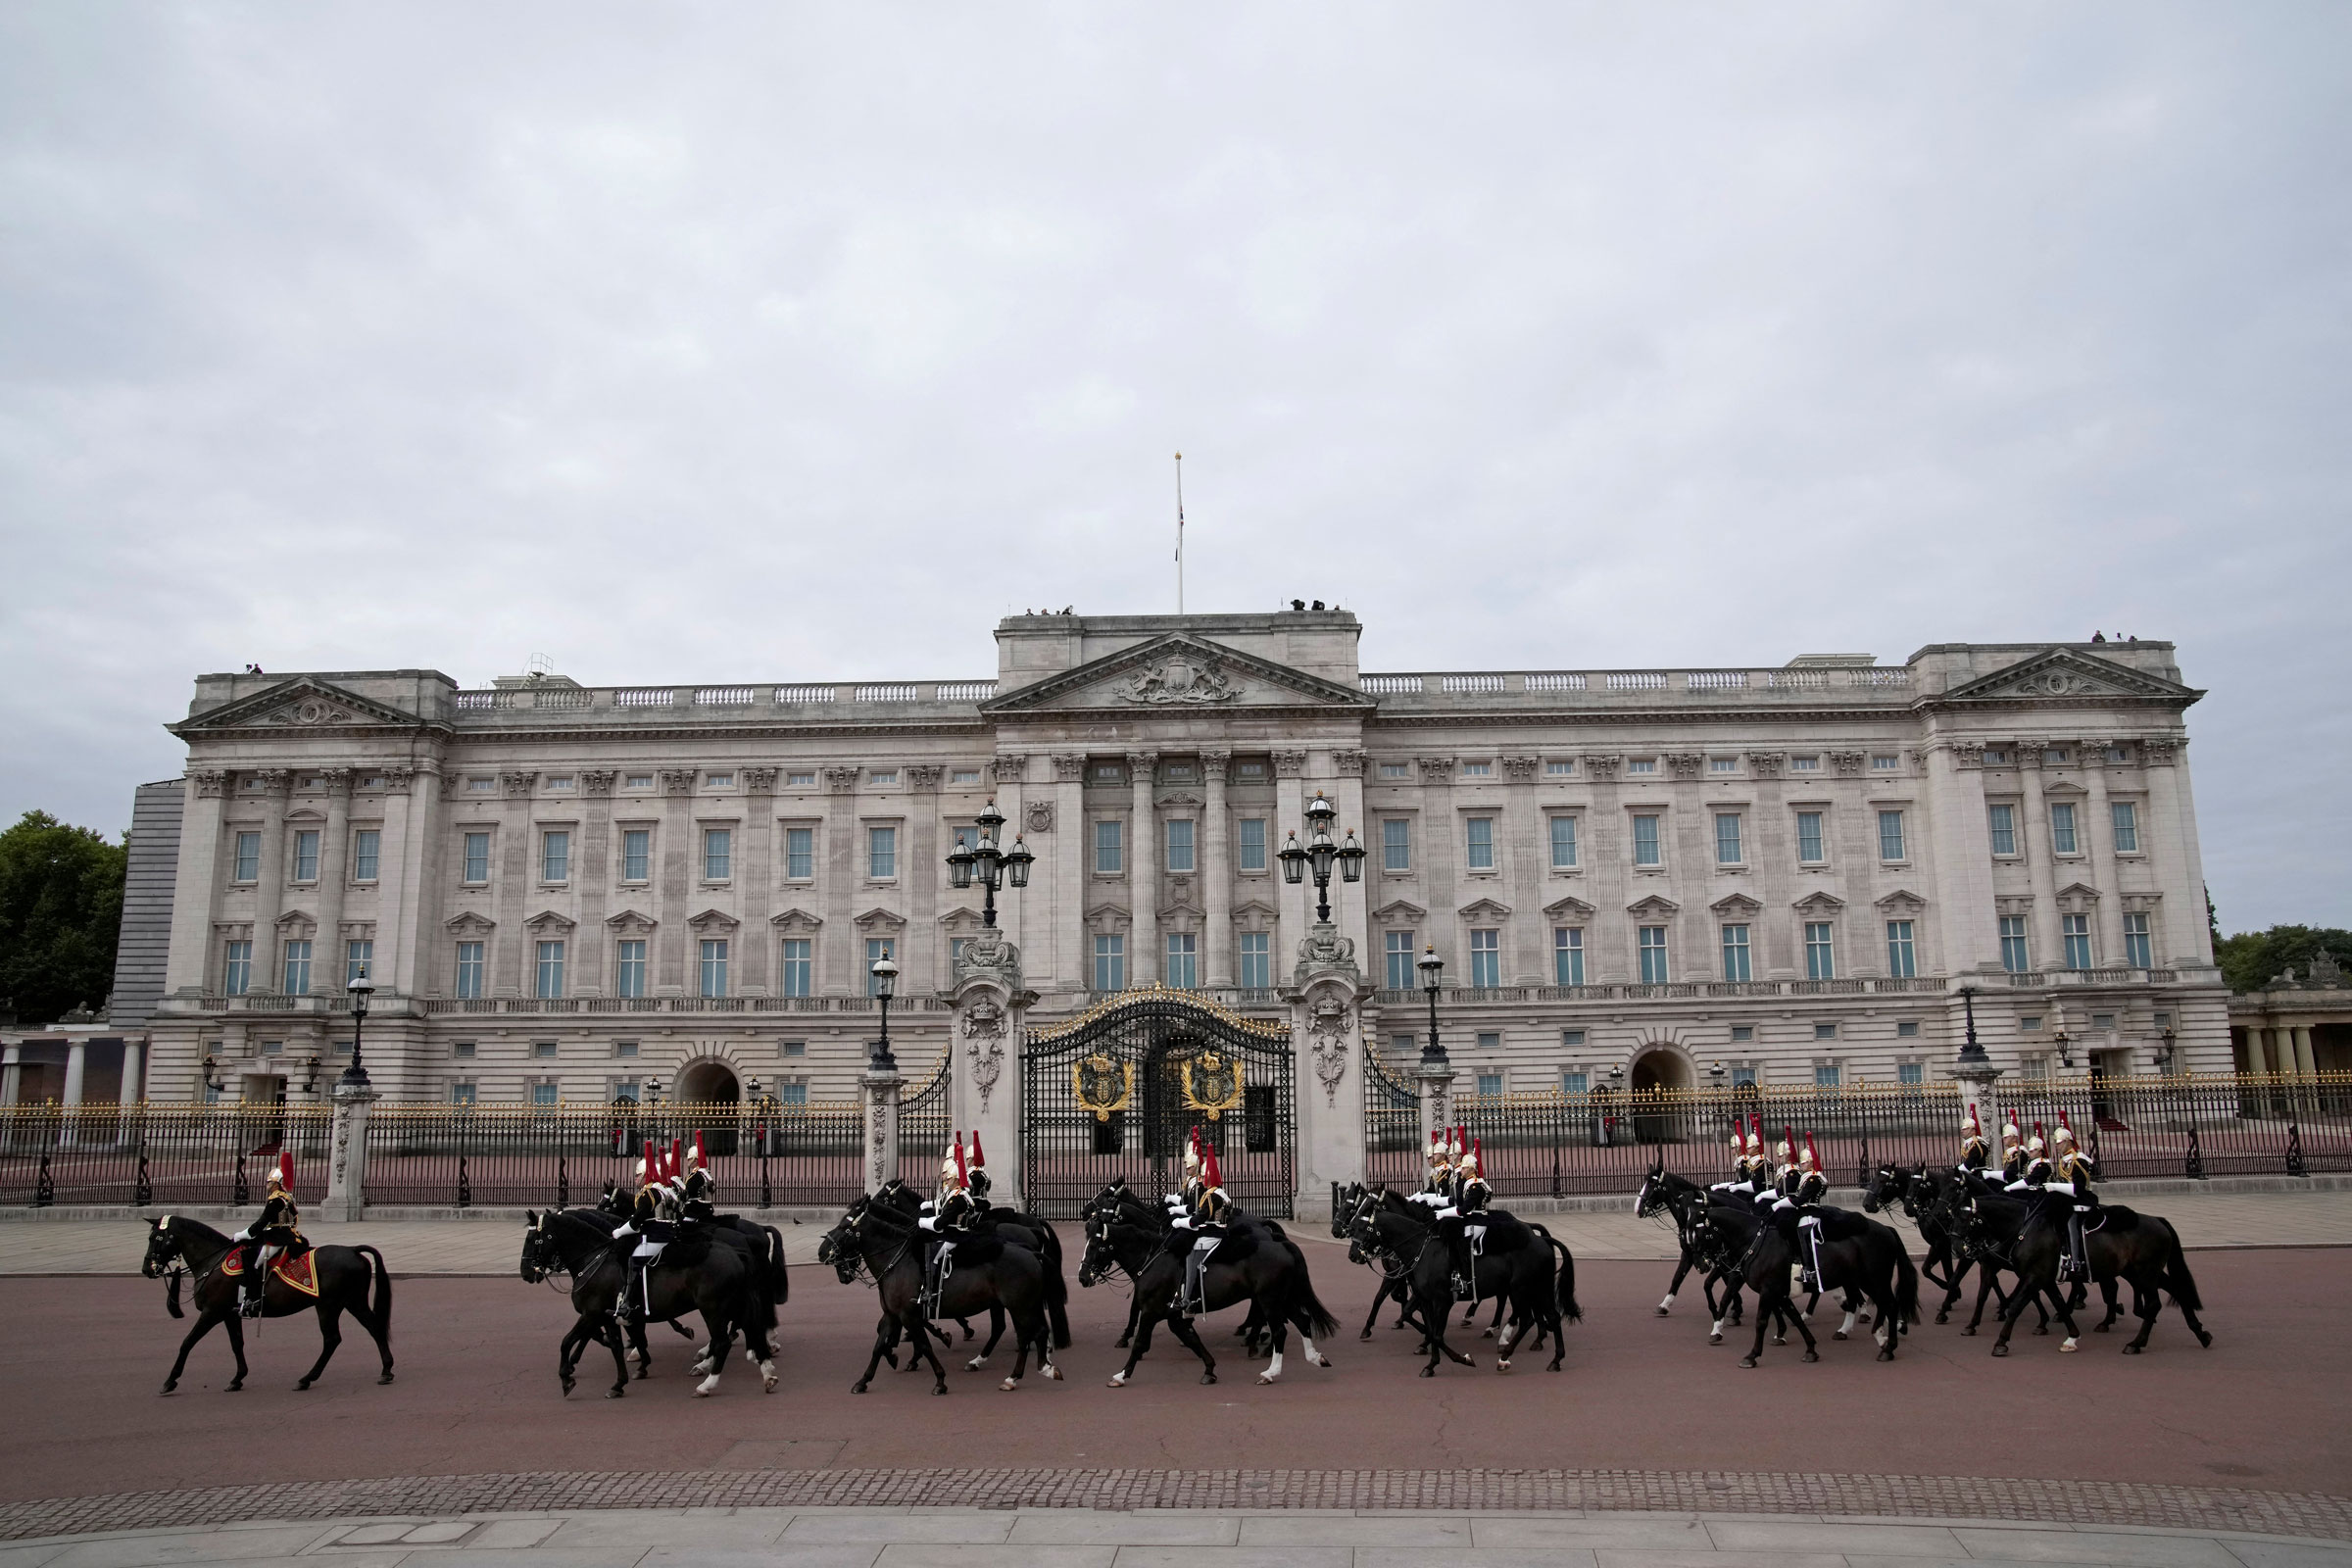 Soldiers on horseback ride past Buckingham Palace before Queen Elizabeth II’s funeral service at Westminster Abbey in central London.